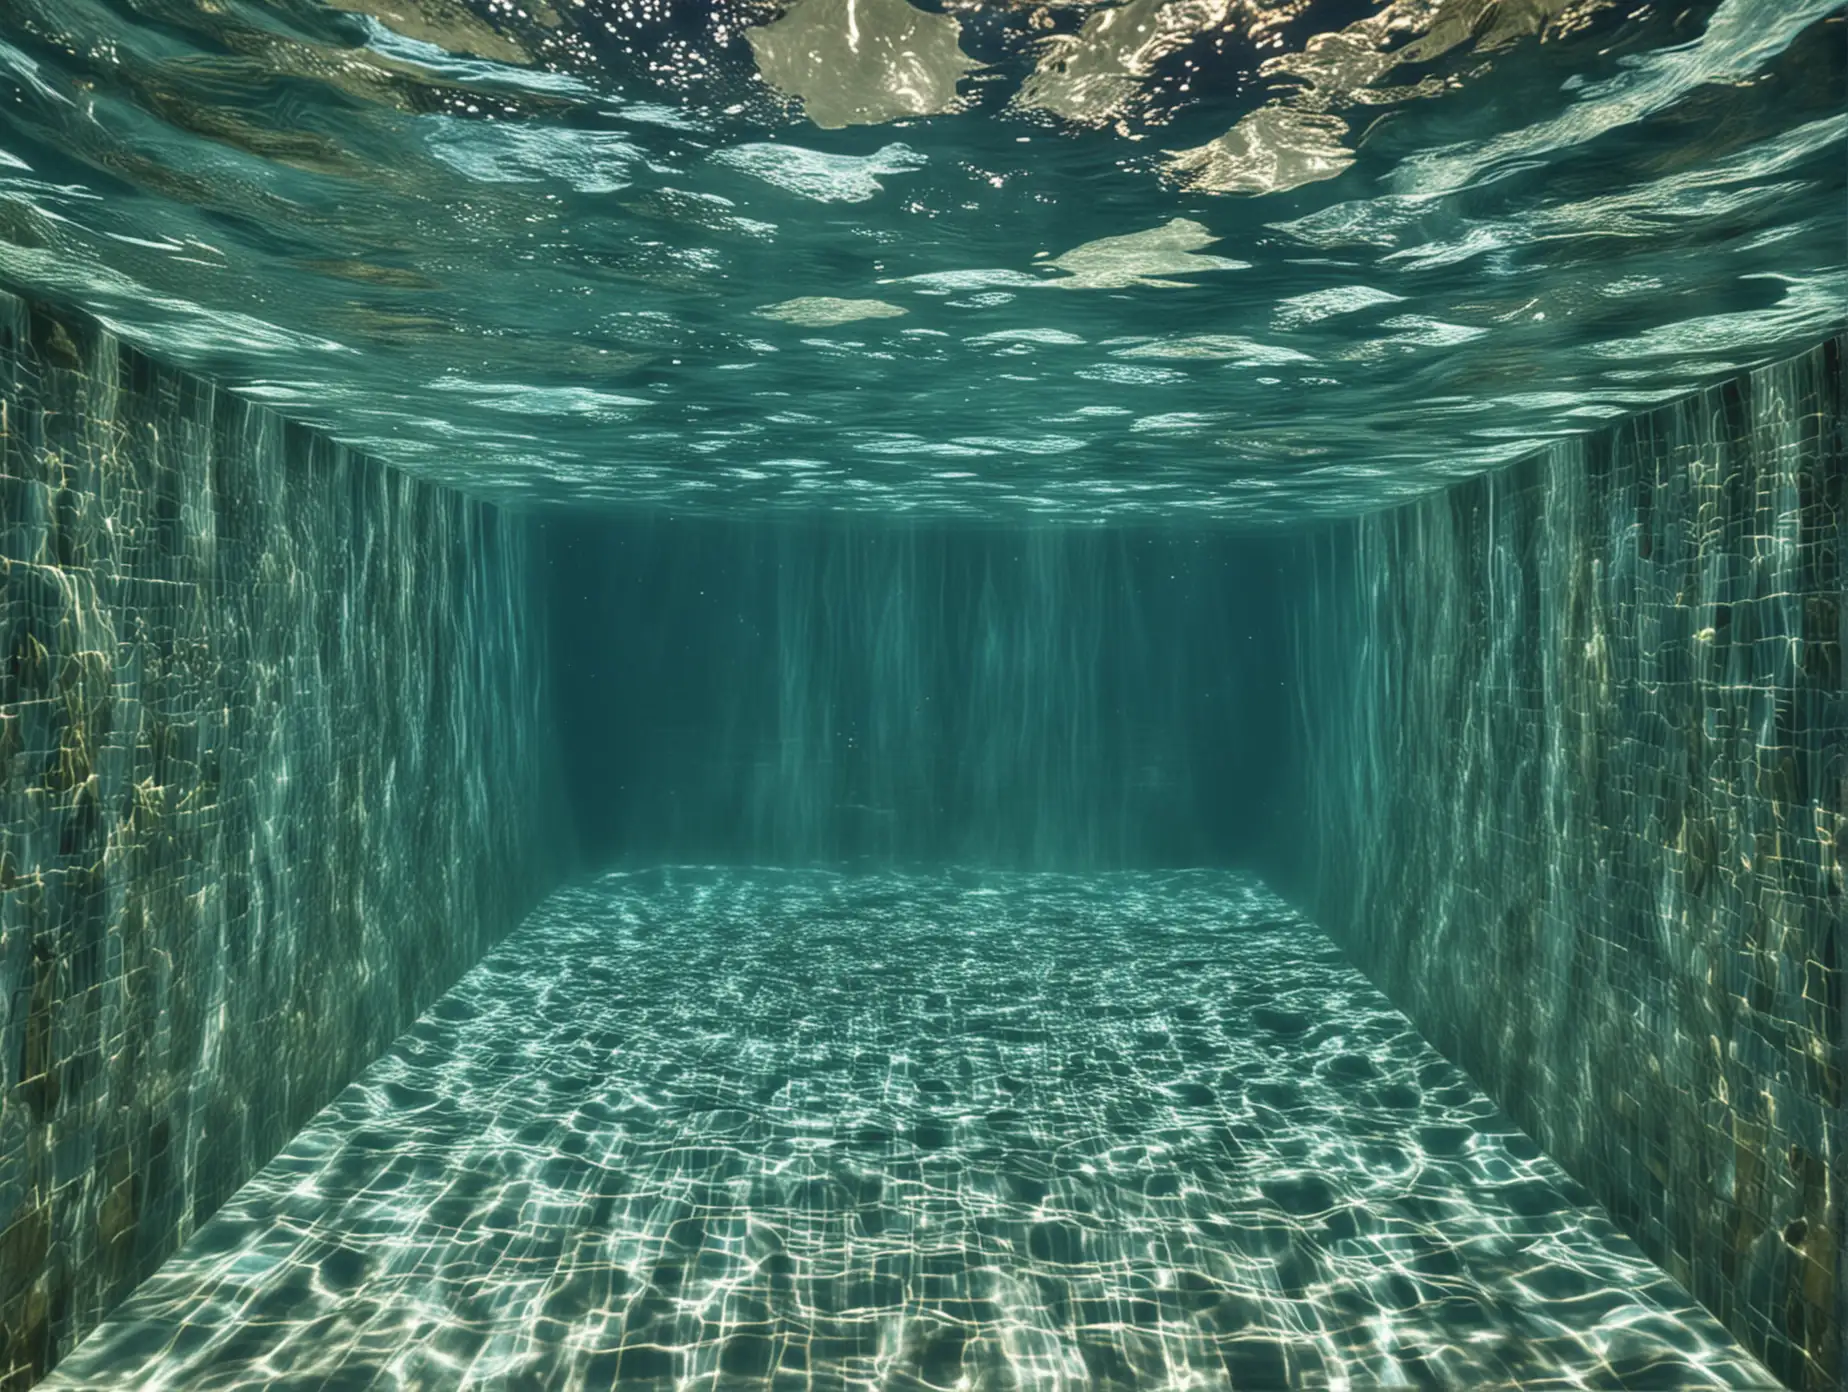 photos of swimming pool underwater giving a refreshing feeling